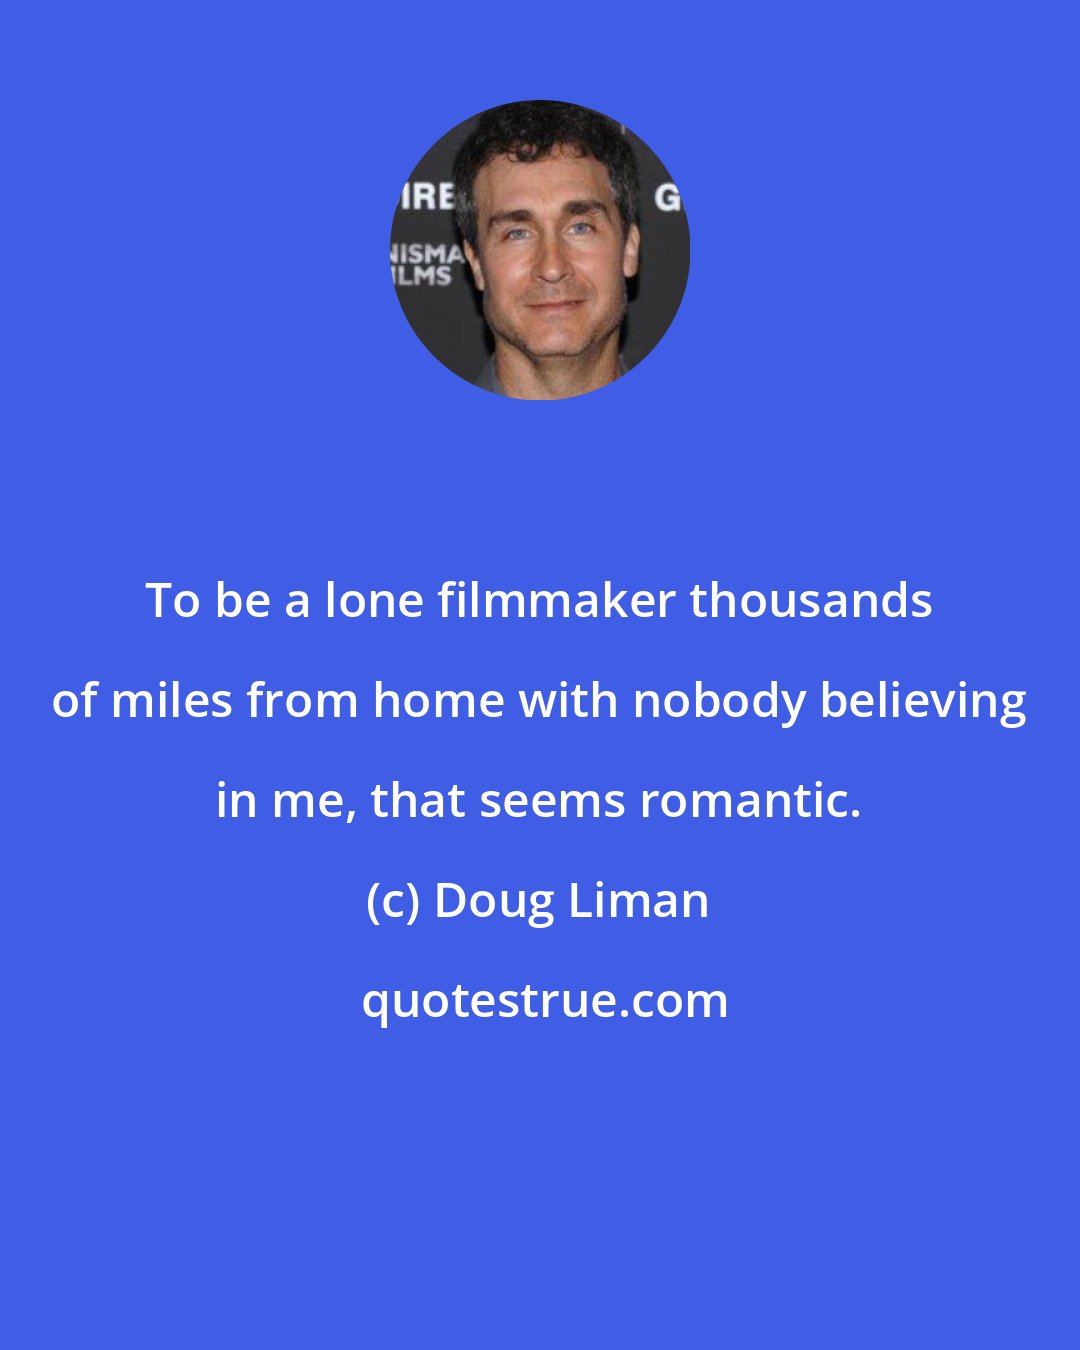 Doug Liman: To be a lone filmmaker thousands of miles from home with nobody believing in me, that seems romantic.